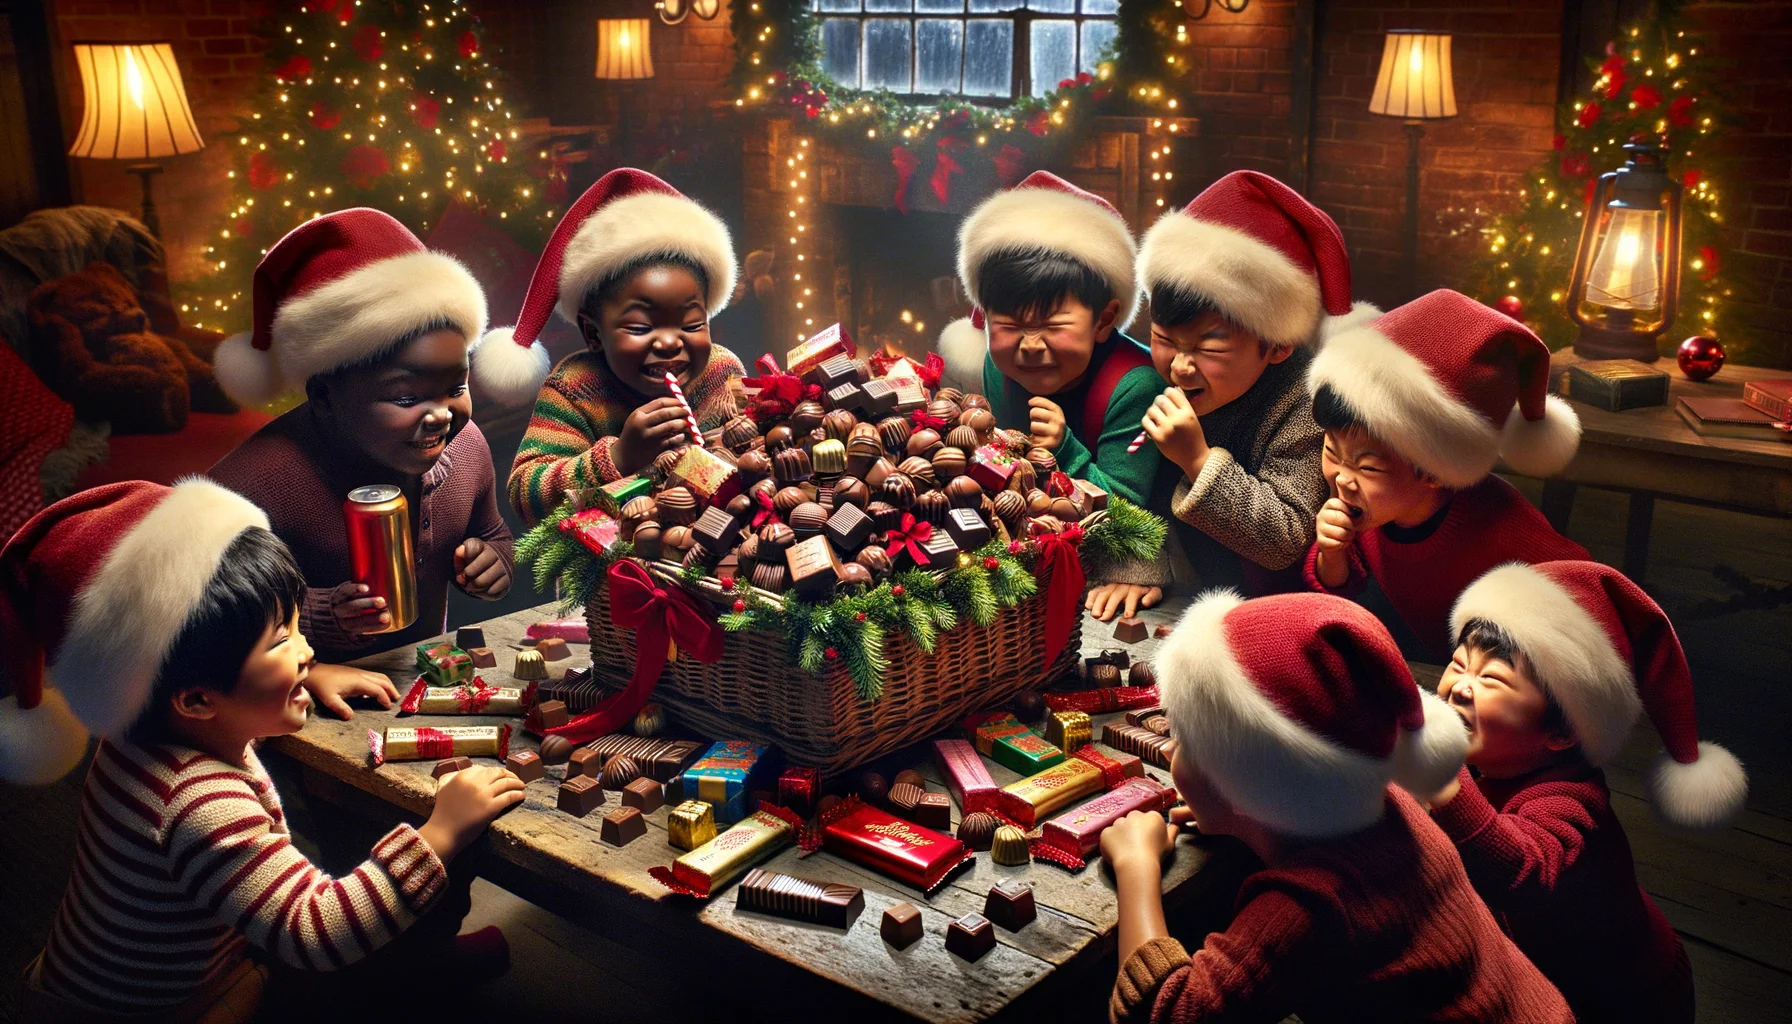 Envision a humorous, real-life setting that embodies the spirit of Christmas. In the center of this scenario, you will find an assortment of festive chocolate gift baskets, overflowing with a variety of chocolates. These baskets are adorned with red and green ribbons, sitting on a rustic table covered with Christmas decorations. The humor comes from a group of Black and Asian children, both boys and girls, dressed in Santa hats, attempting to sneak a chocolate from the basket without being caught, their faces filled with anticipation and mischief. Lights twinkle around the room, casting a warm and inviting glow.